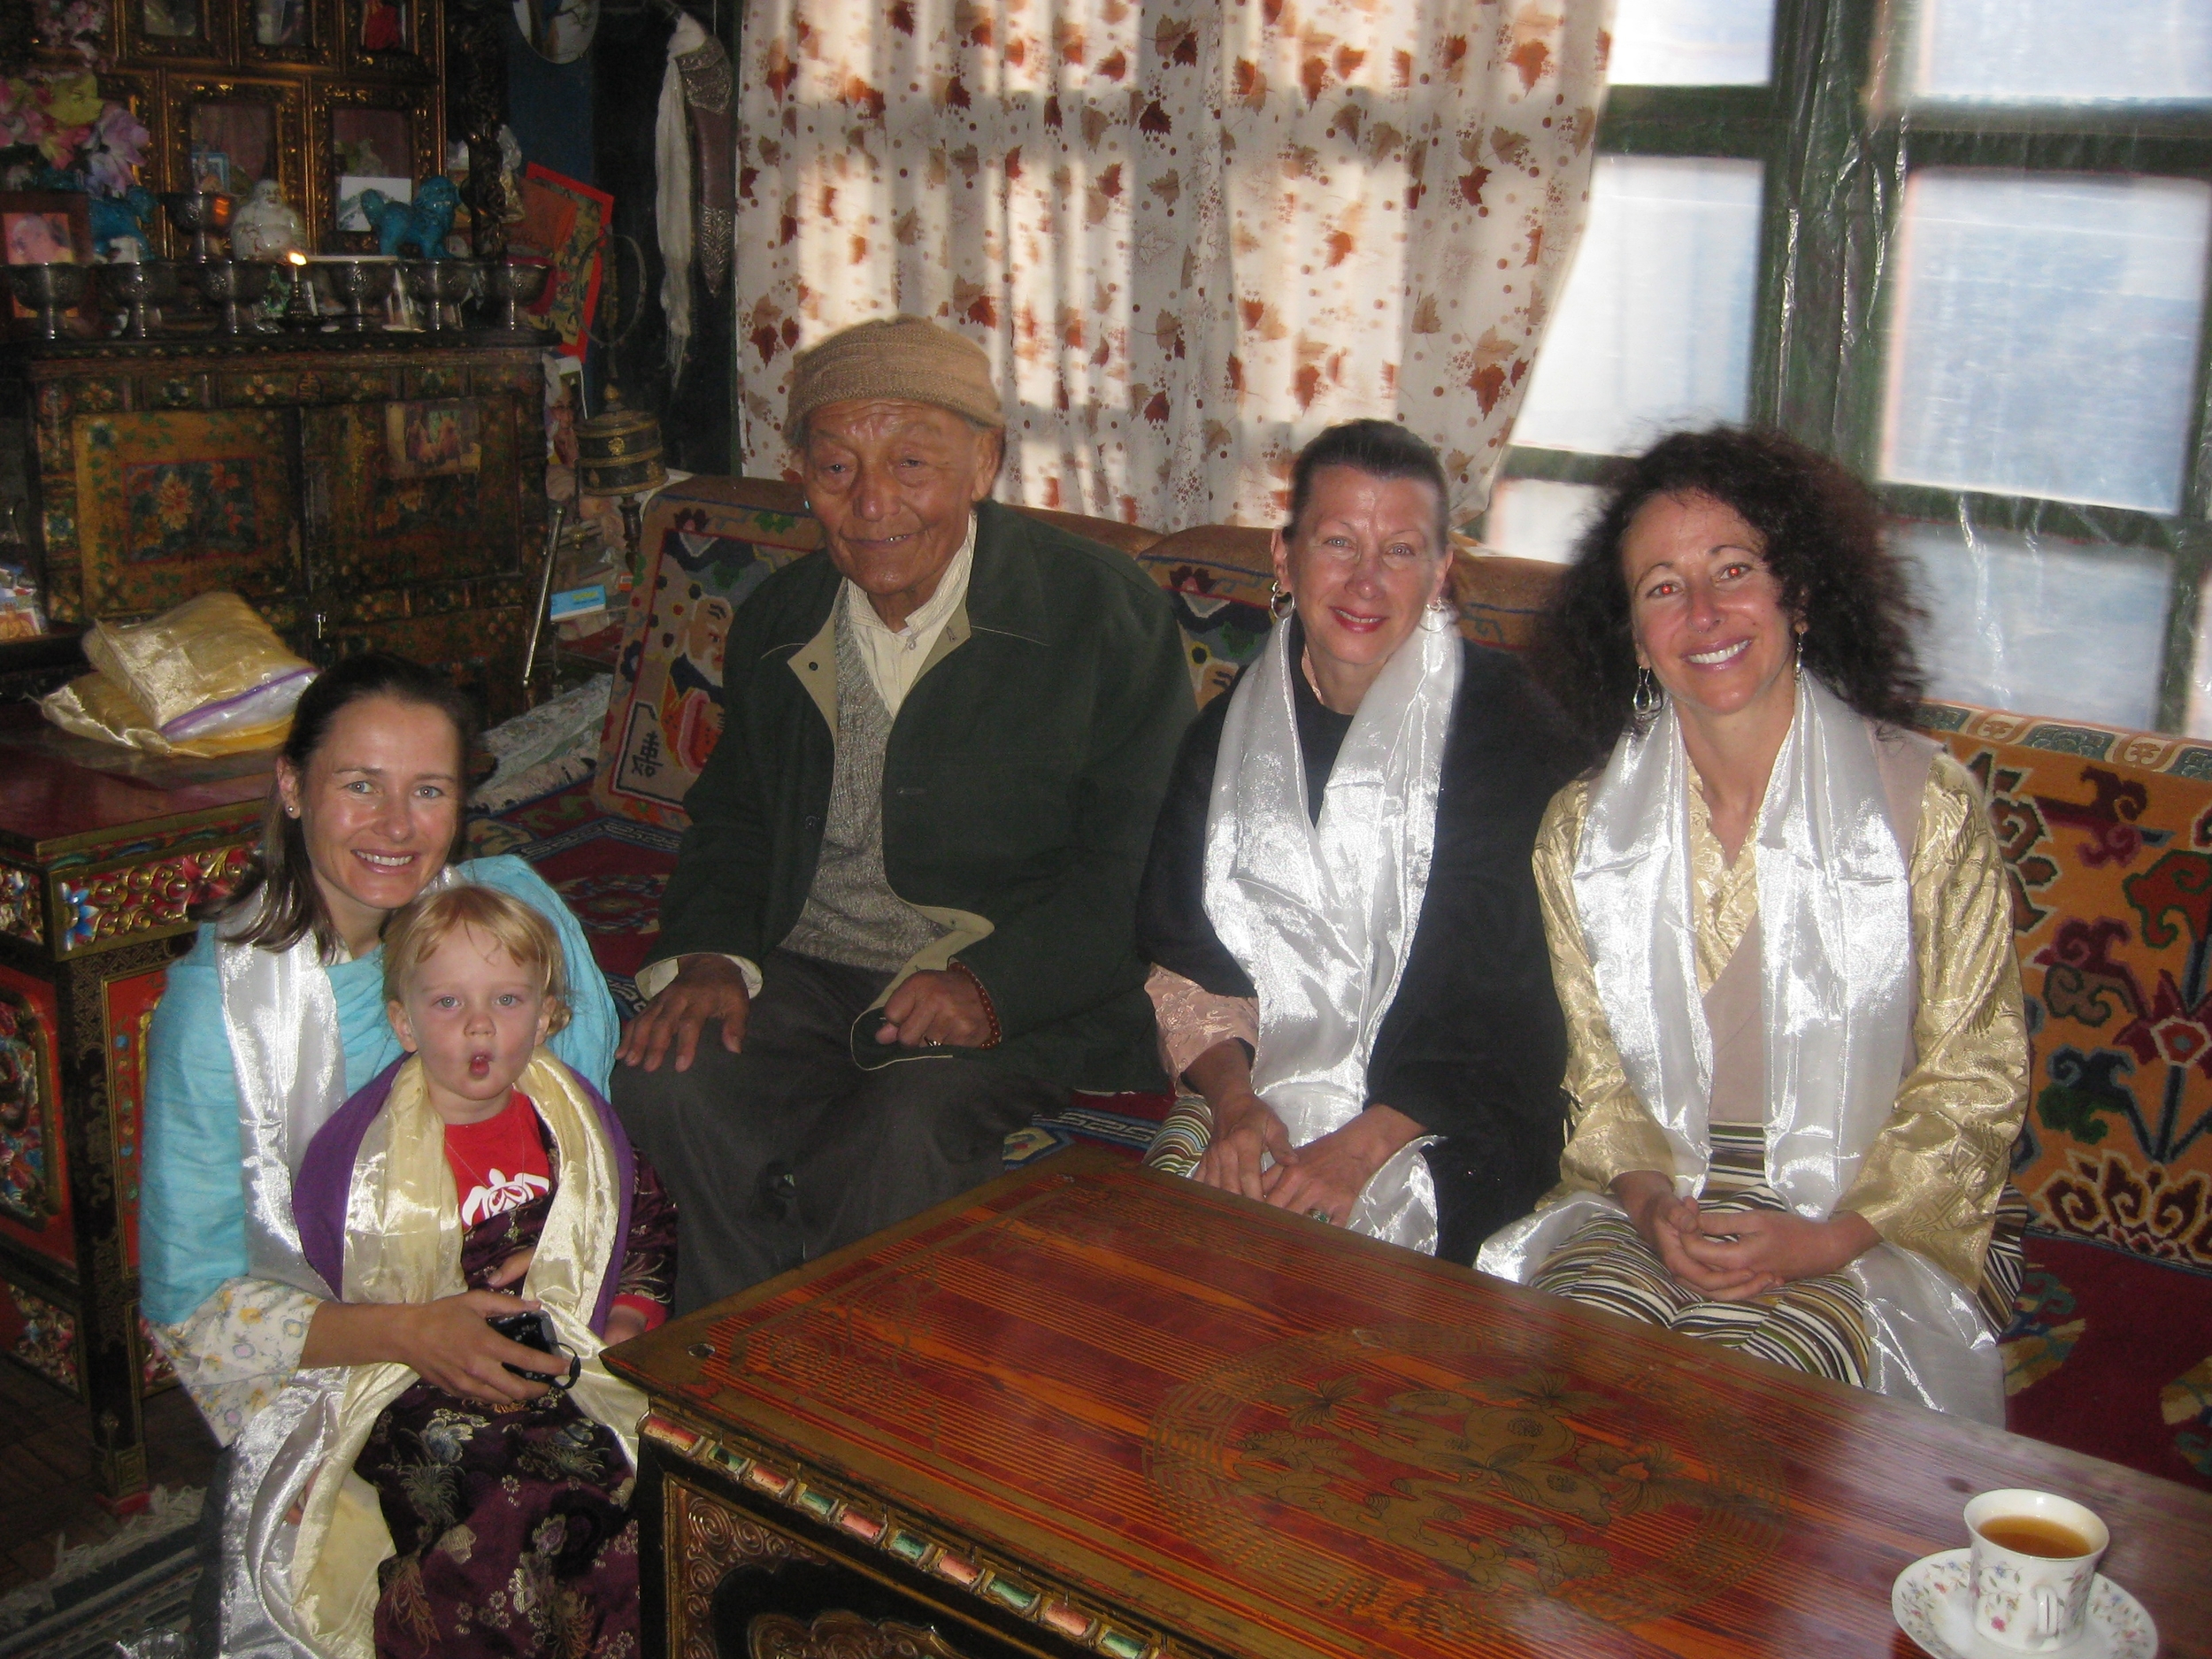 L-R: Dr. Sienna Craig with daughter Aida, Jigme Palbar Bista, Raja (king) of the kingdom of Lo, visual artist Maureen Drdak and composer Dr. Andrea Clearfield in the Raja's public audience room, 2008.